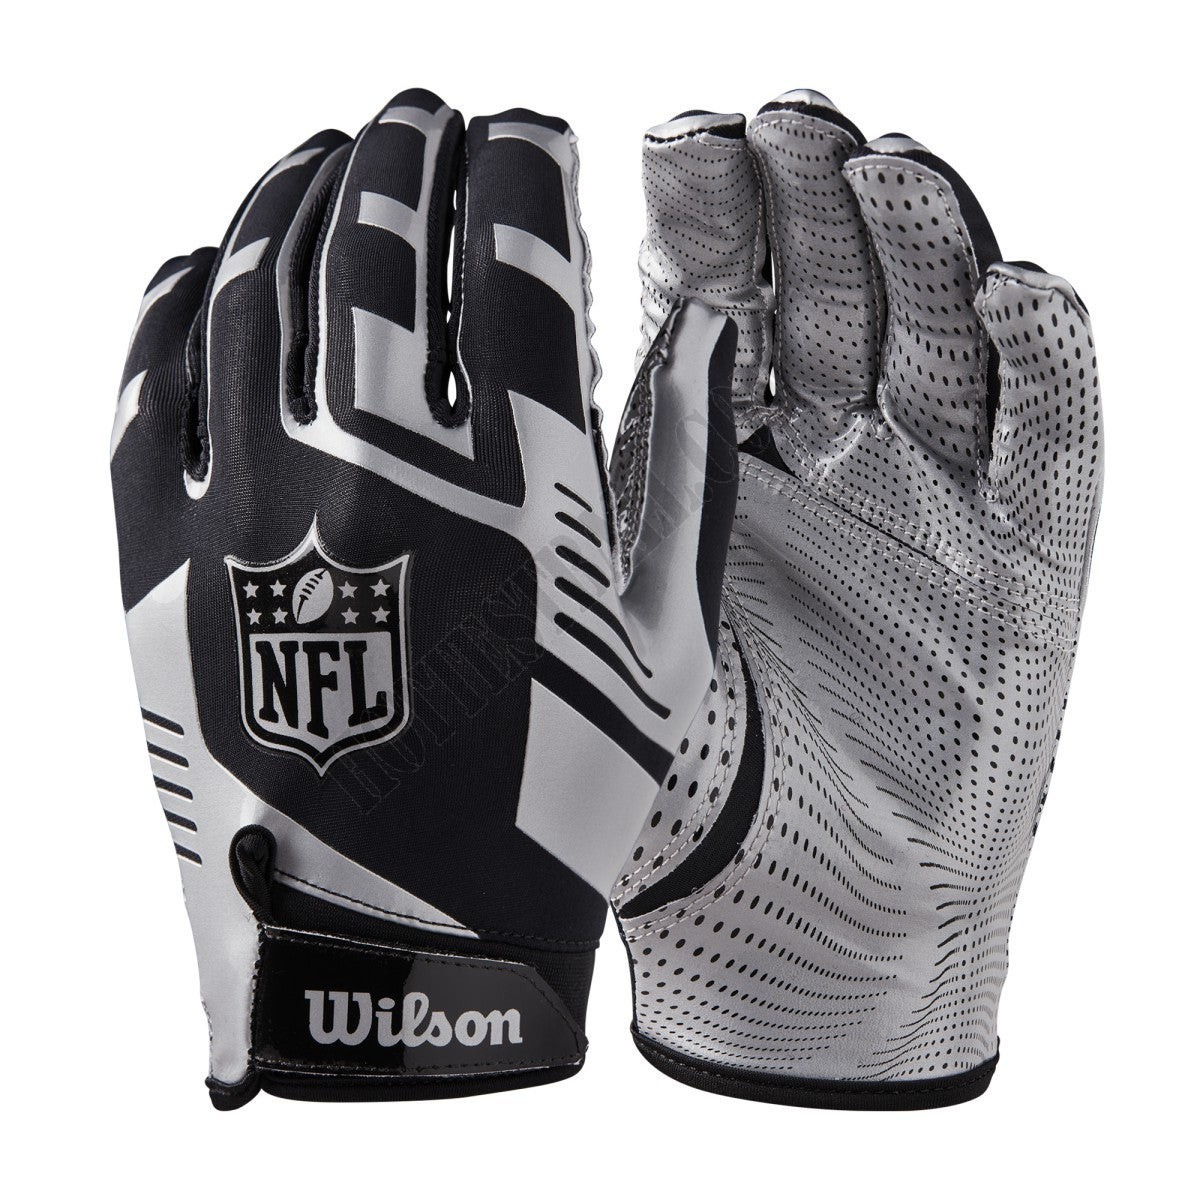 NFL Stretch Fit Receivers Gloves - Wilson Discount Store - NFL Stretch Fit Receivers Gloves - Wilson Discount Store